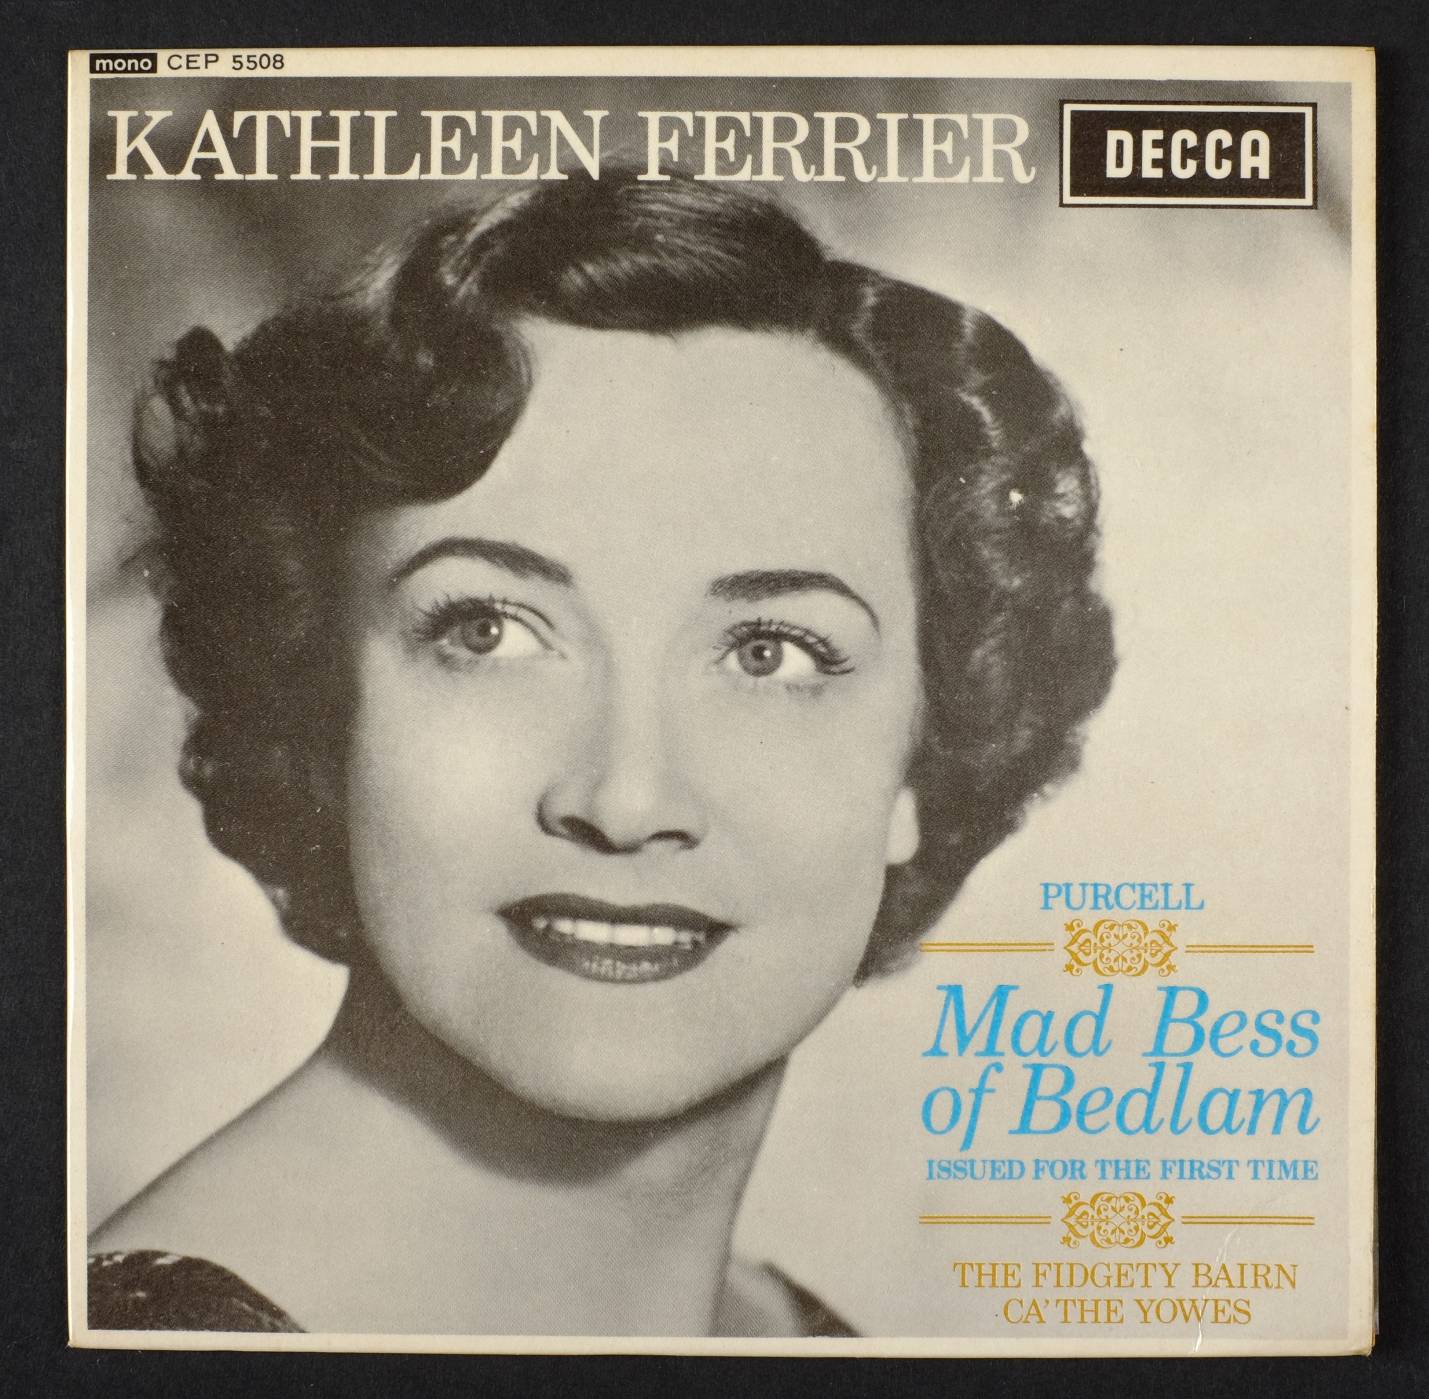 *7-inch Classical Records. A collection of approximately 125 classical 7-inch records from the 1950s - Image 3 of 18